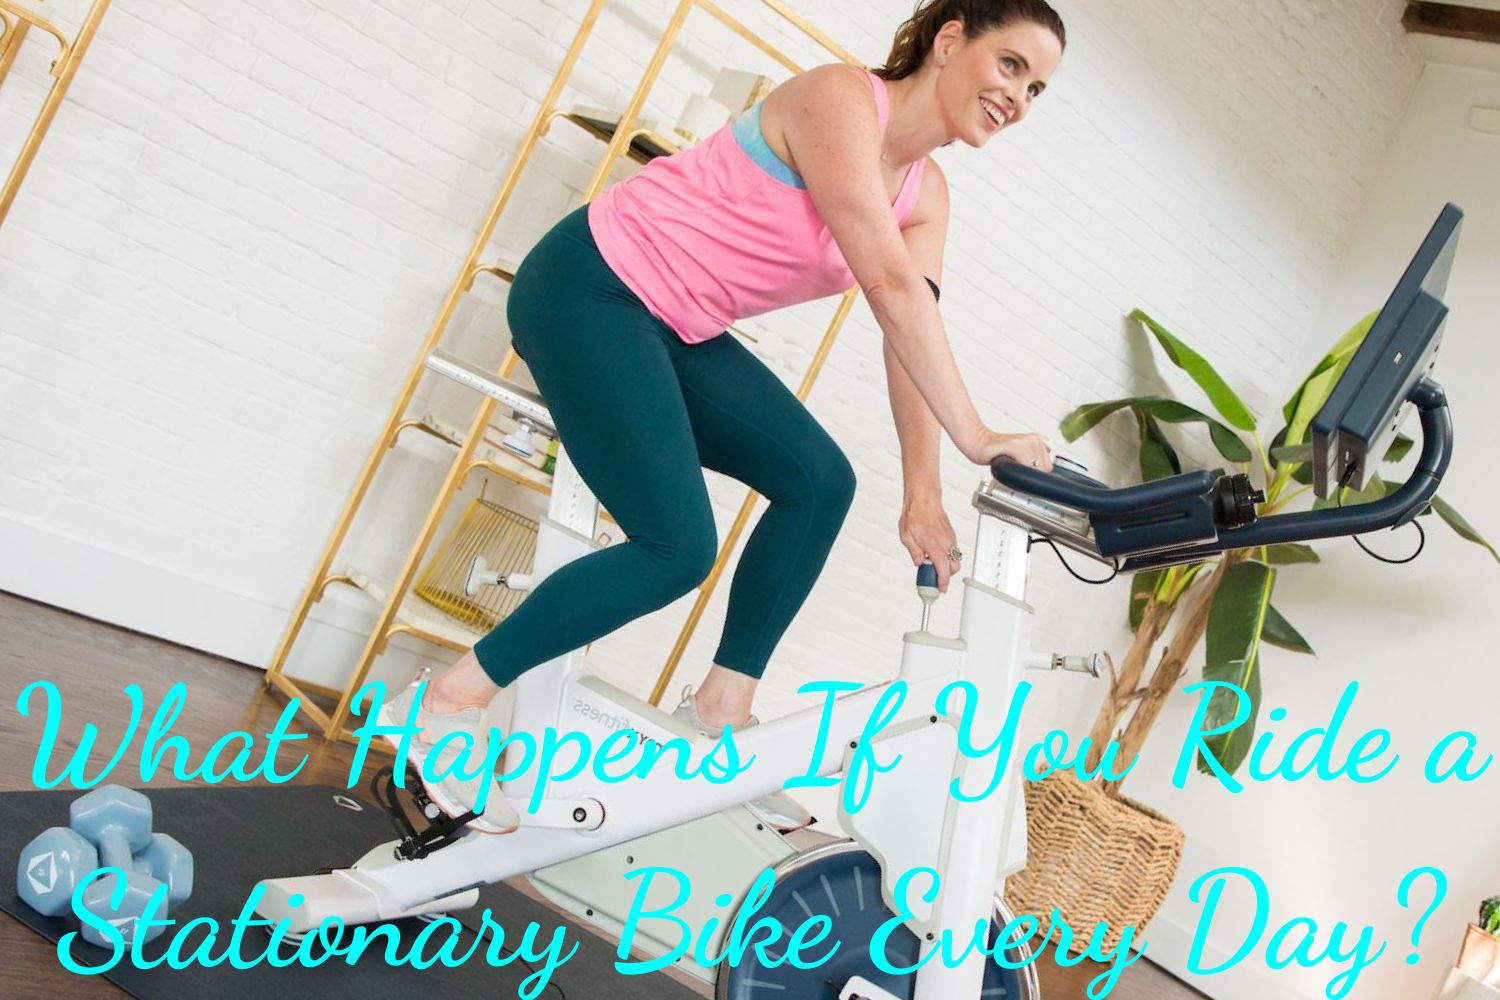 What Happens If You Ride a Stationary Bike Every Day?